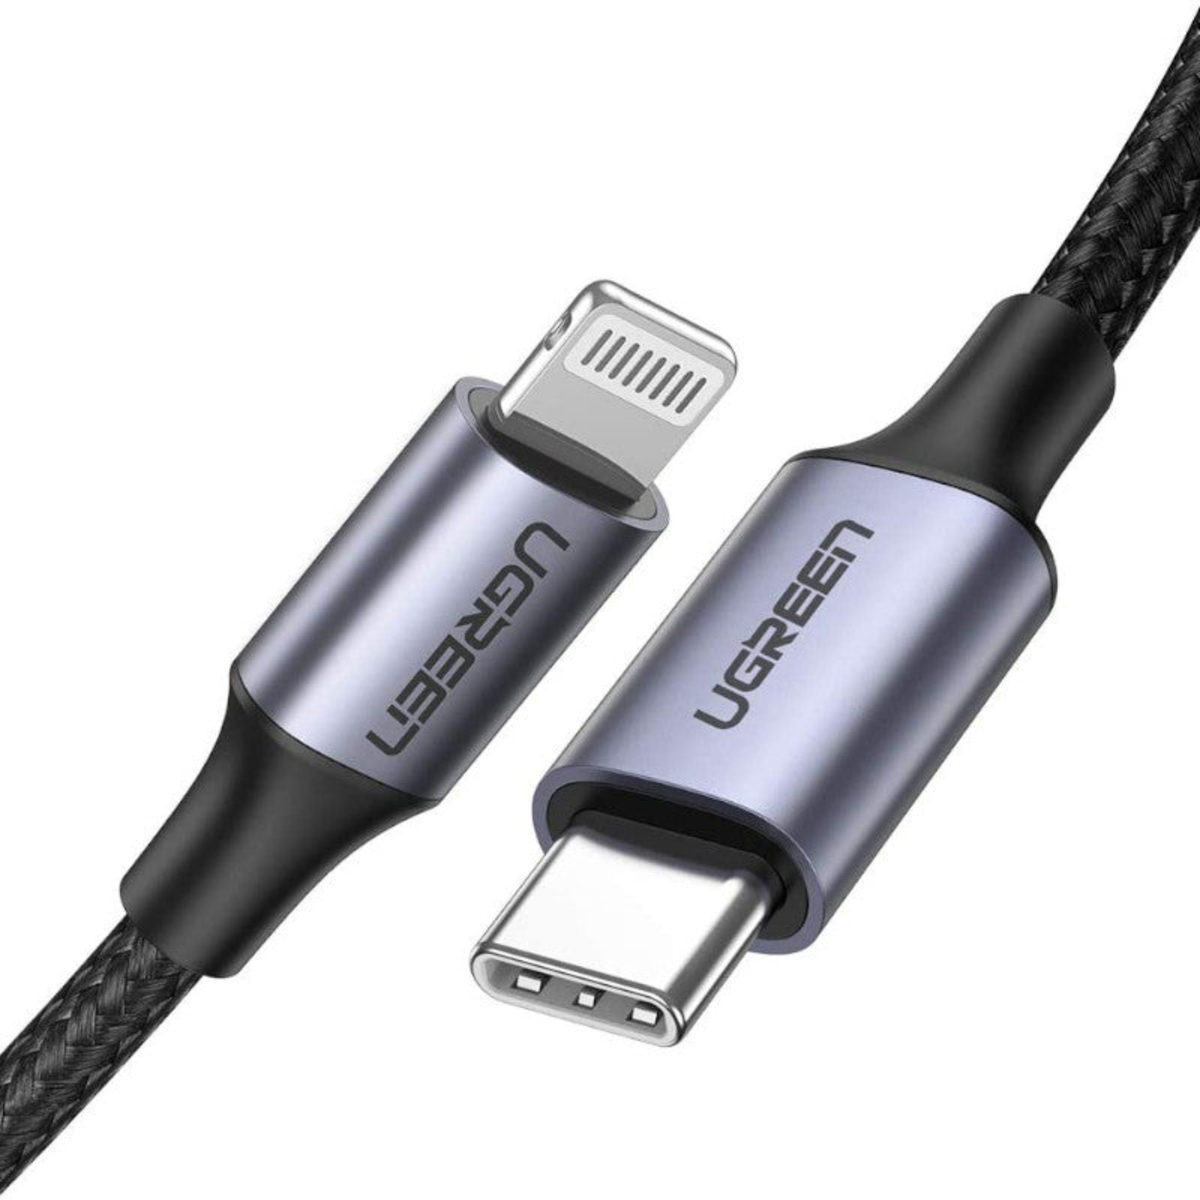 Ugreen USB Type-C to Lightning MFI Cable, 3A, PD 36 W, 1 m, Black, US304